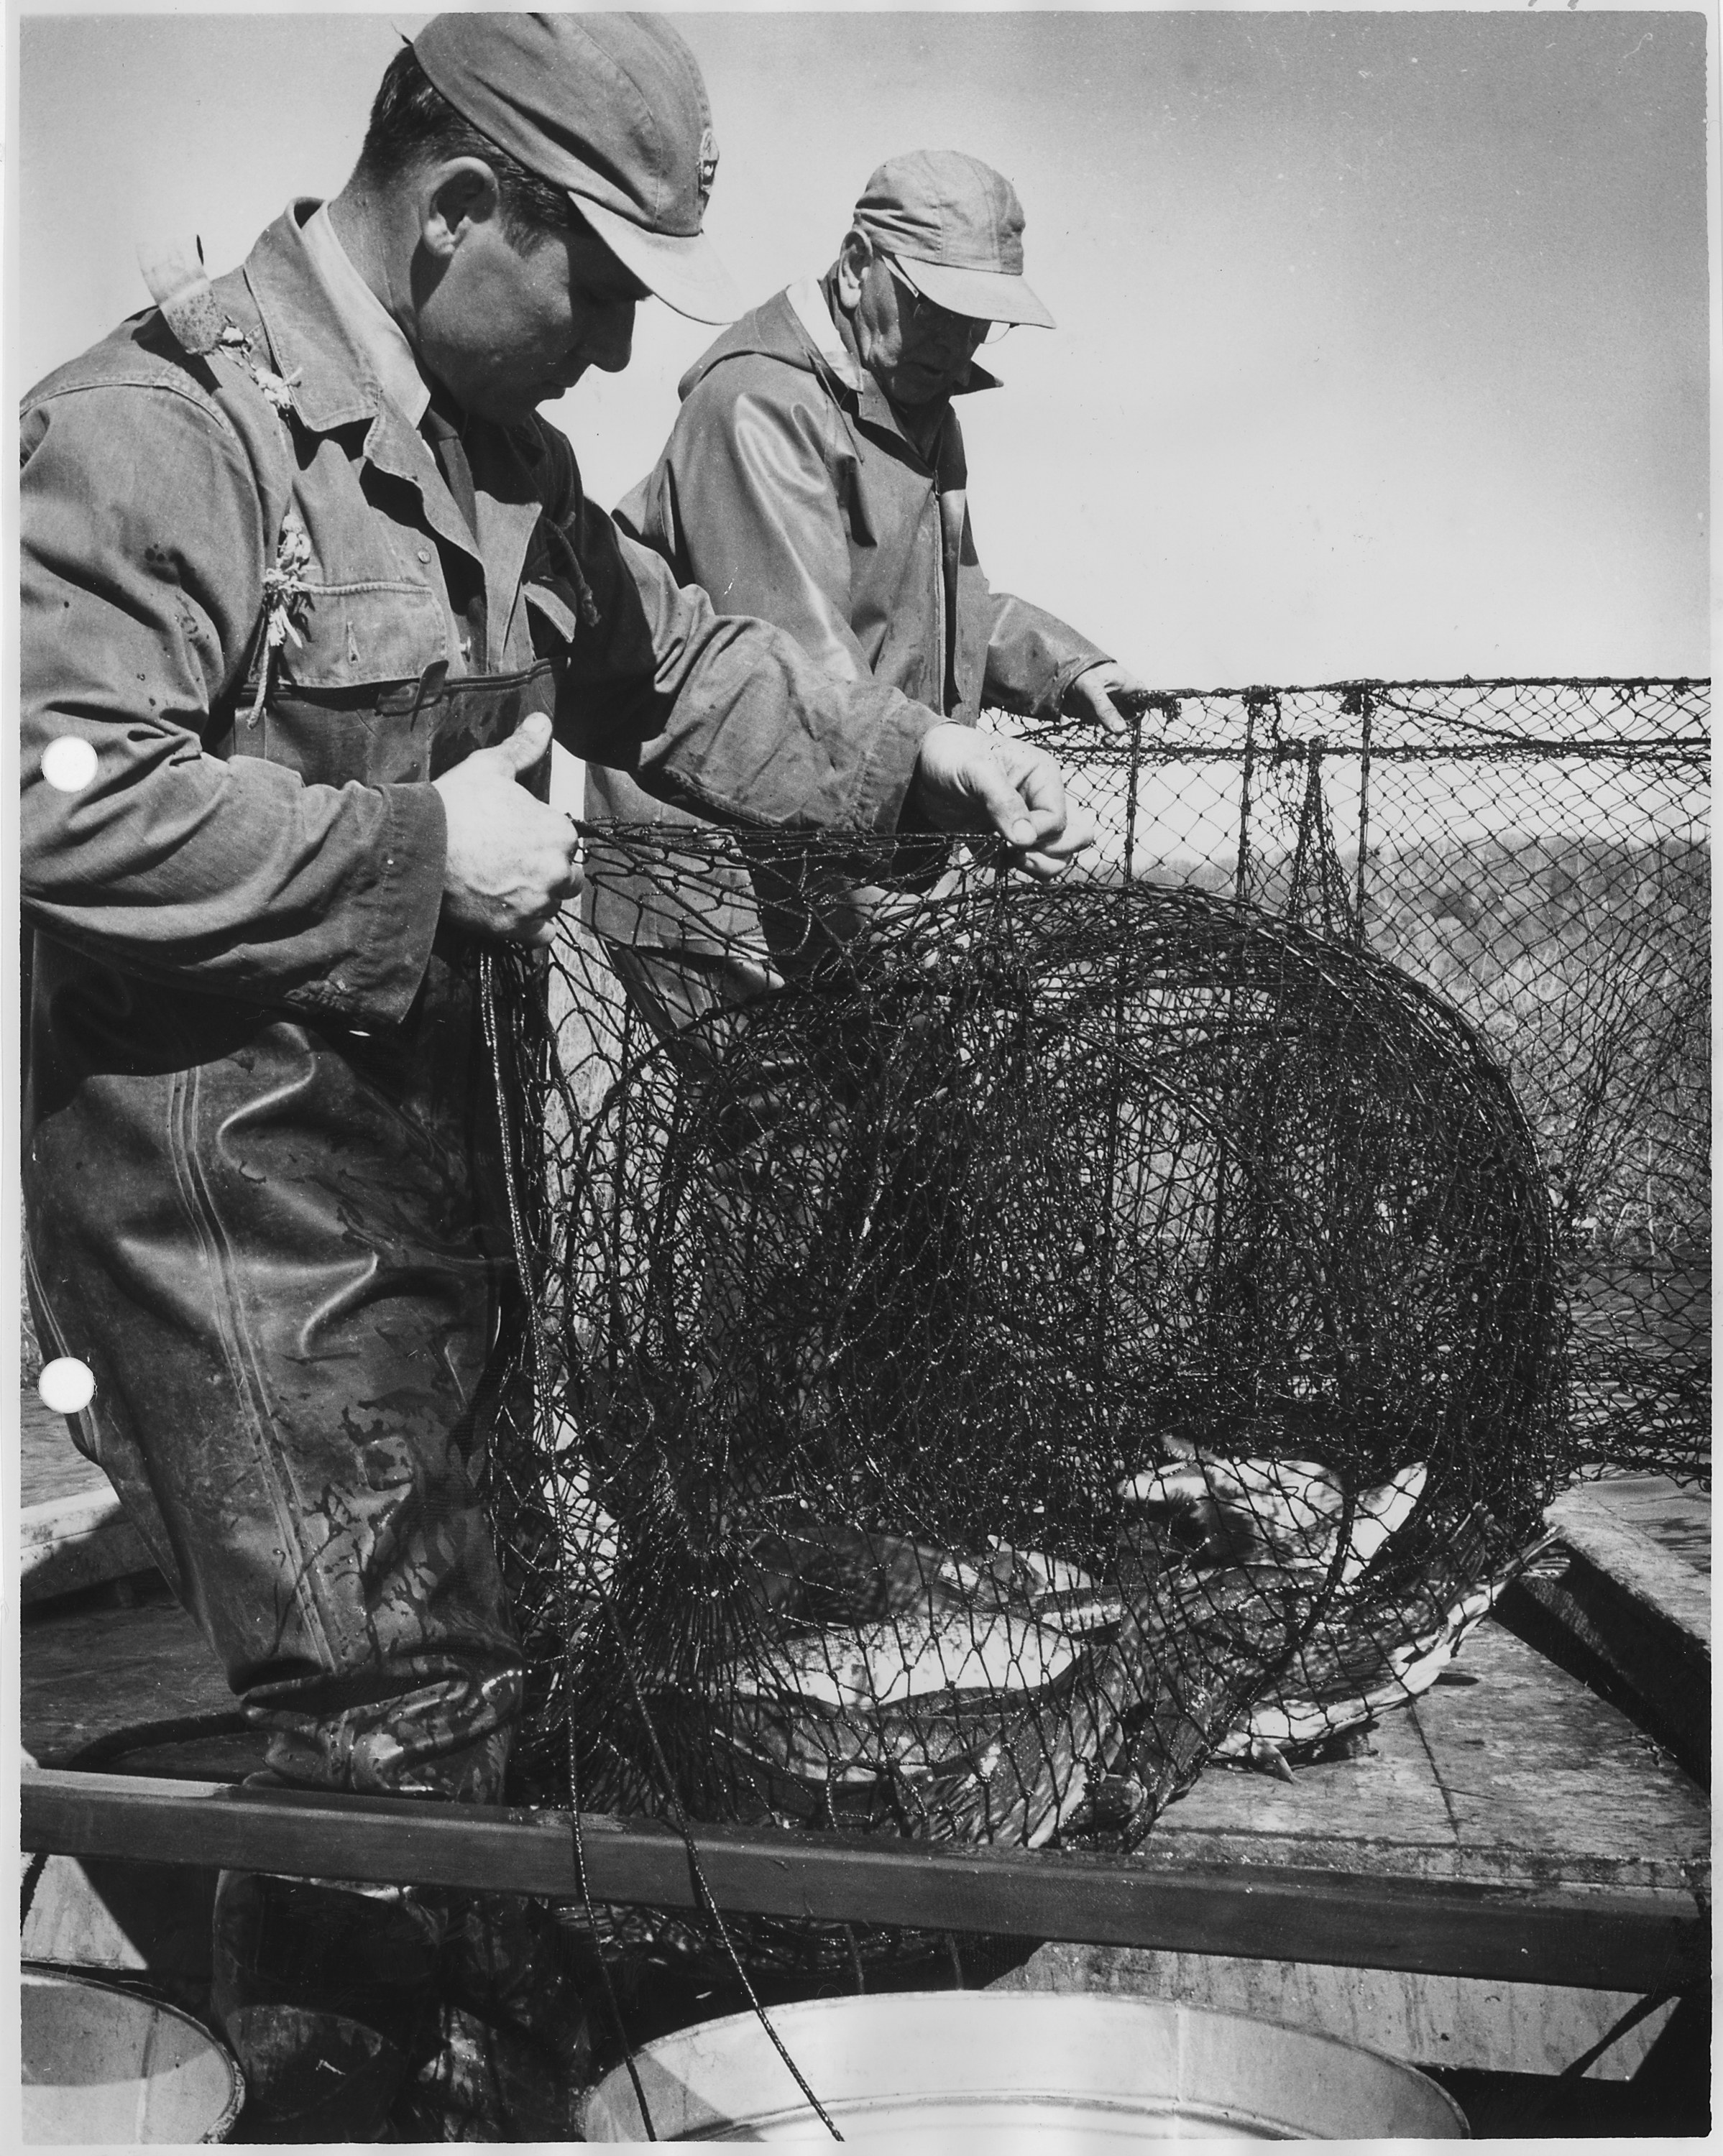 Two men with load of netted fish - NARA - 283862